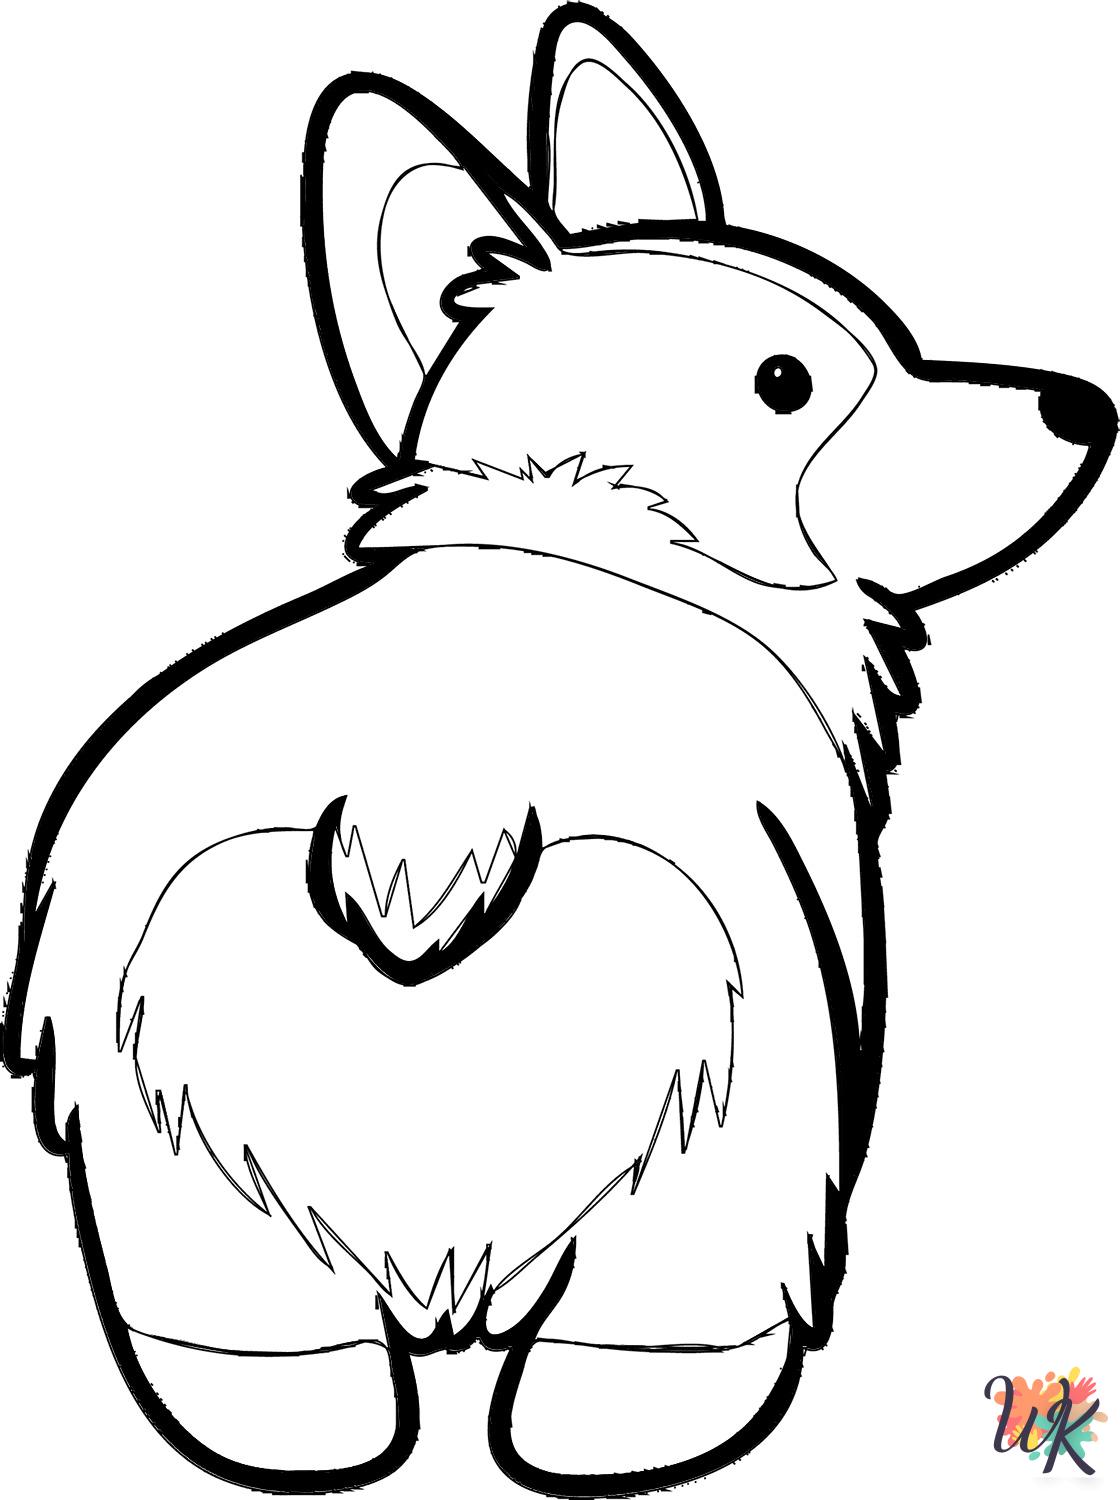 Corgi coloring pages by coloringpageswk on